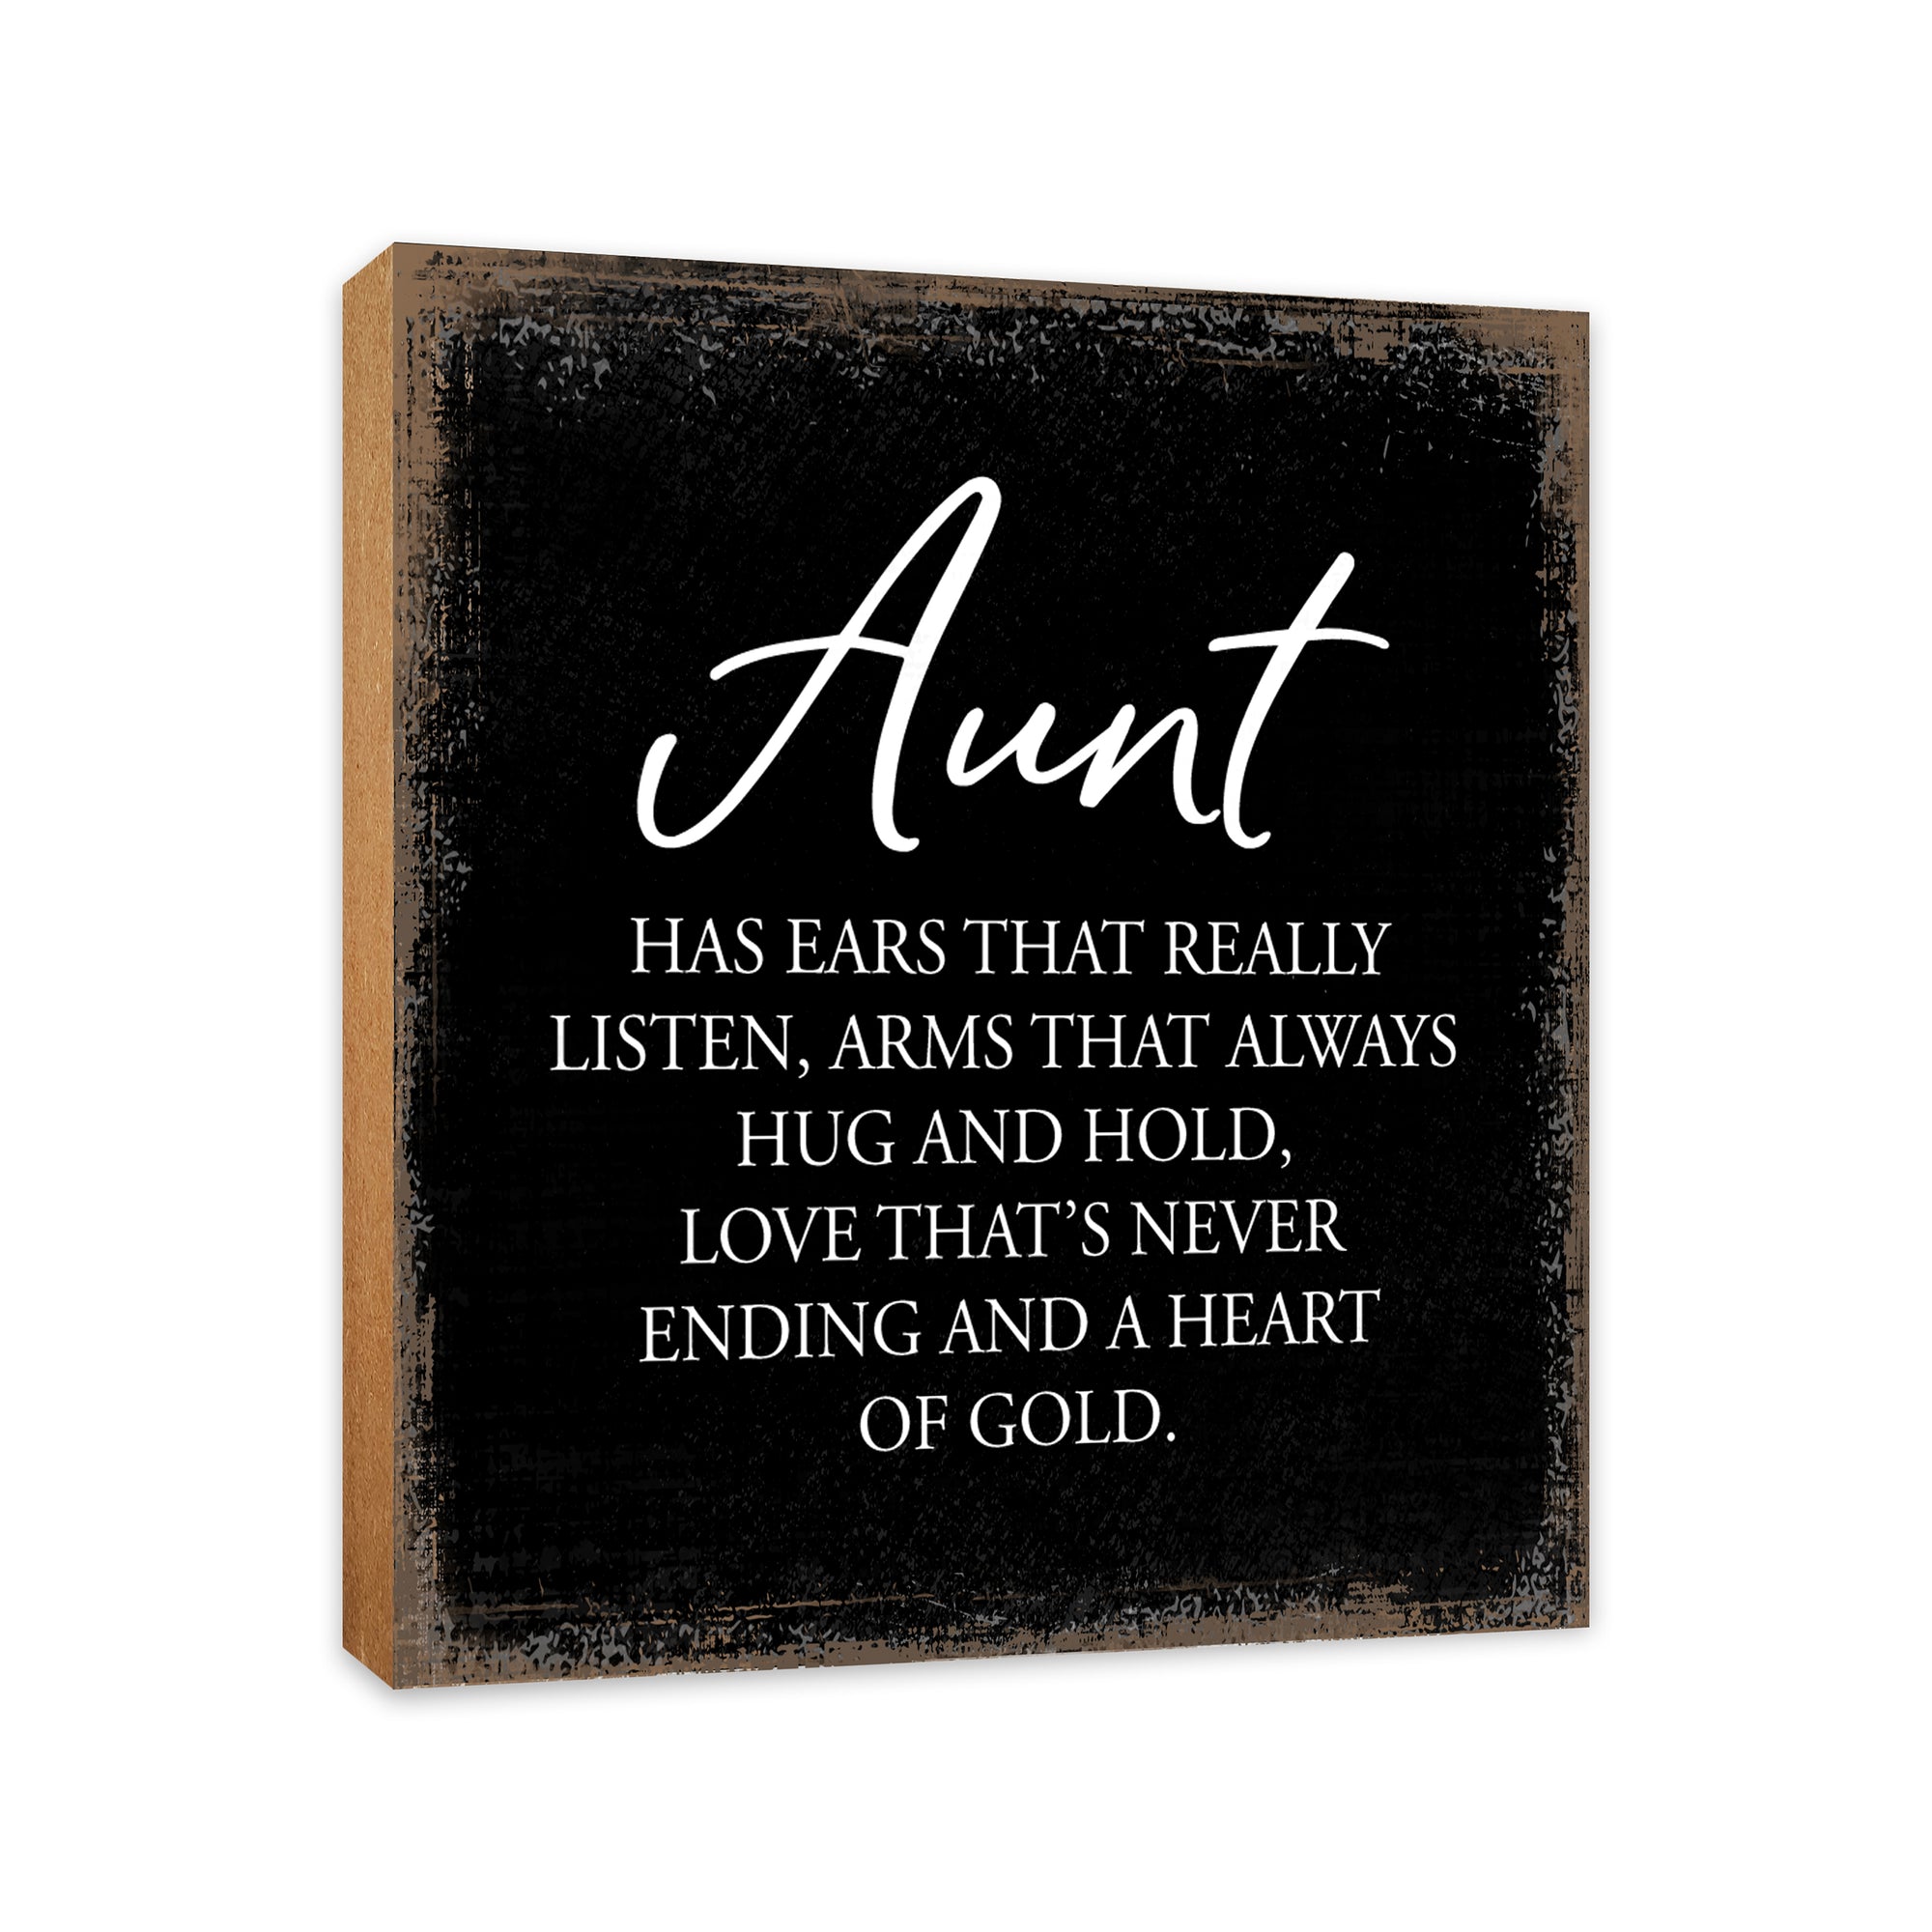 LifeSong Milestones Aunt Has Ears Floral 6x6 Inches Wood Family Art Sign Tabletop and Shelving For Home Décor. Wood Family Signs, art sign tabletop, Wood Art Decor for Living Room, Bedroom, Kitchen, Dining Room, and Entryways Home Decor.